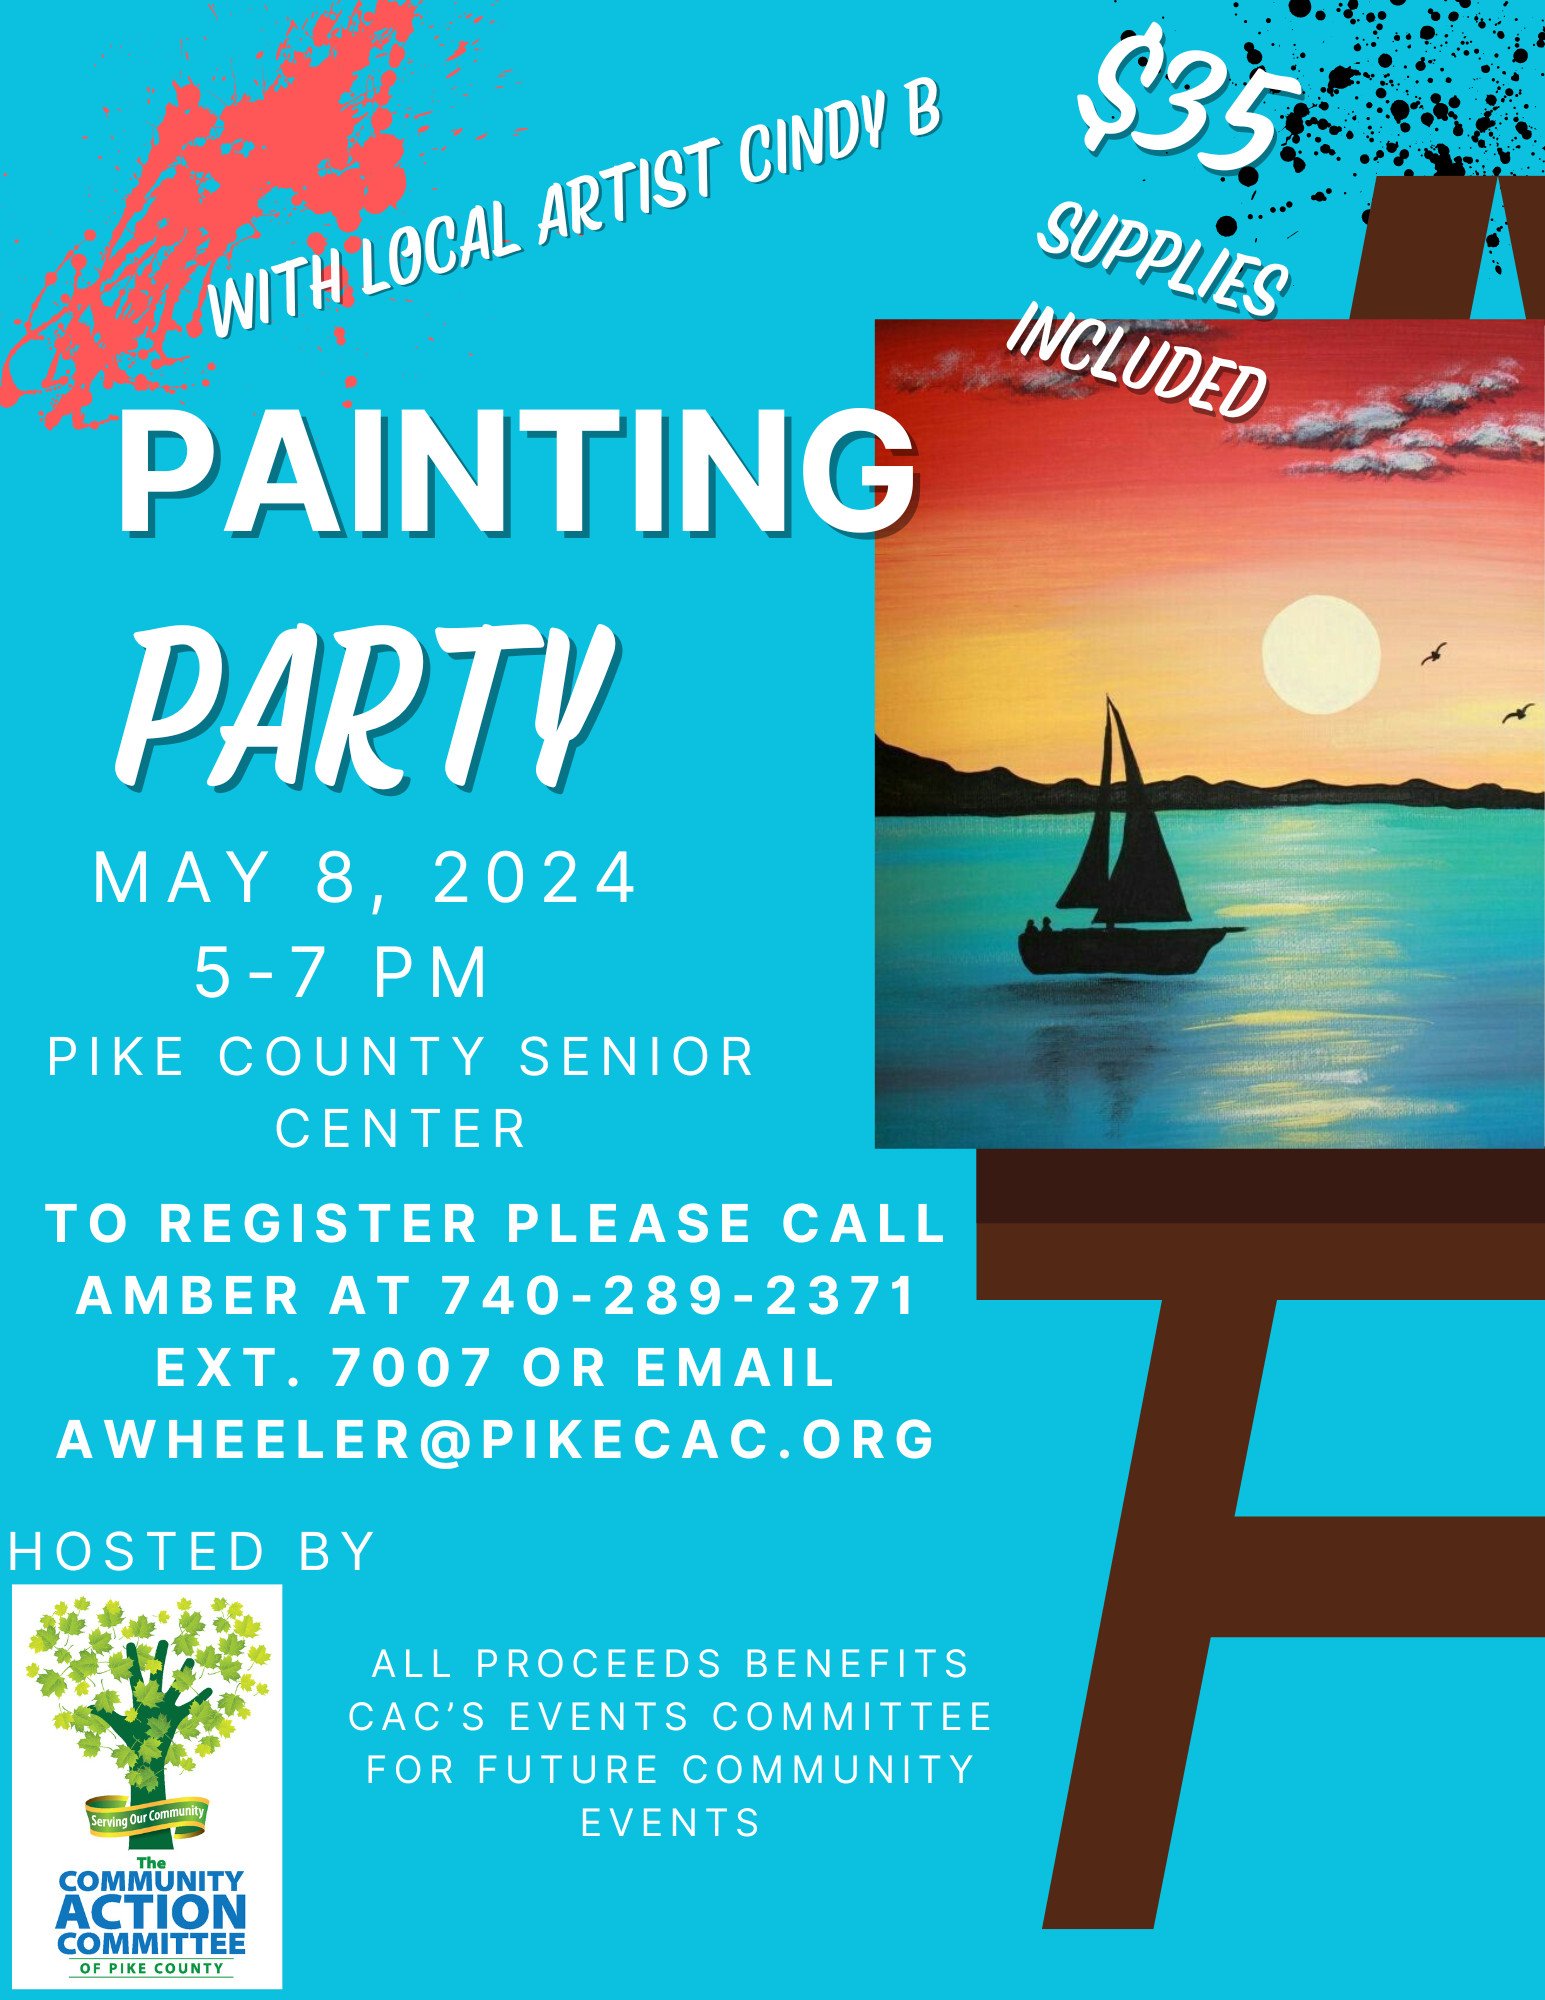   Painting Party with Local Artist Cindy B    Wednesday, May 8    5:00 PM - 7:00 PM    Pike County Senior Center    Waverly  